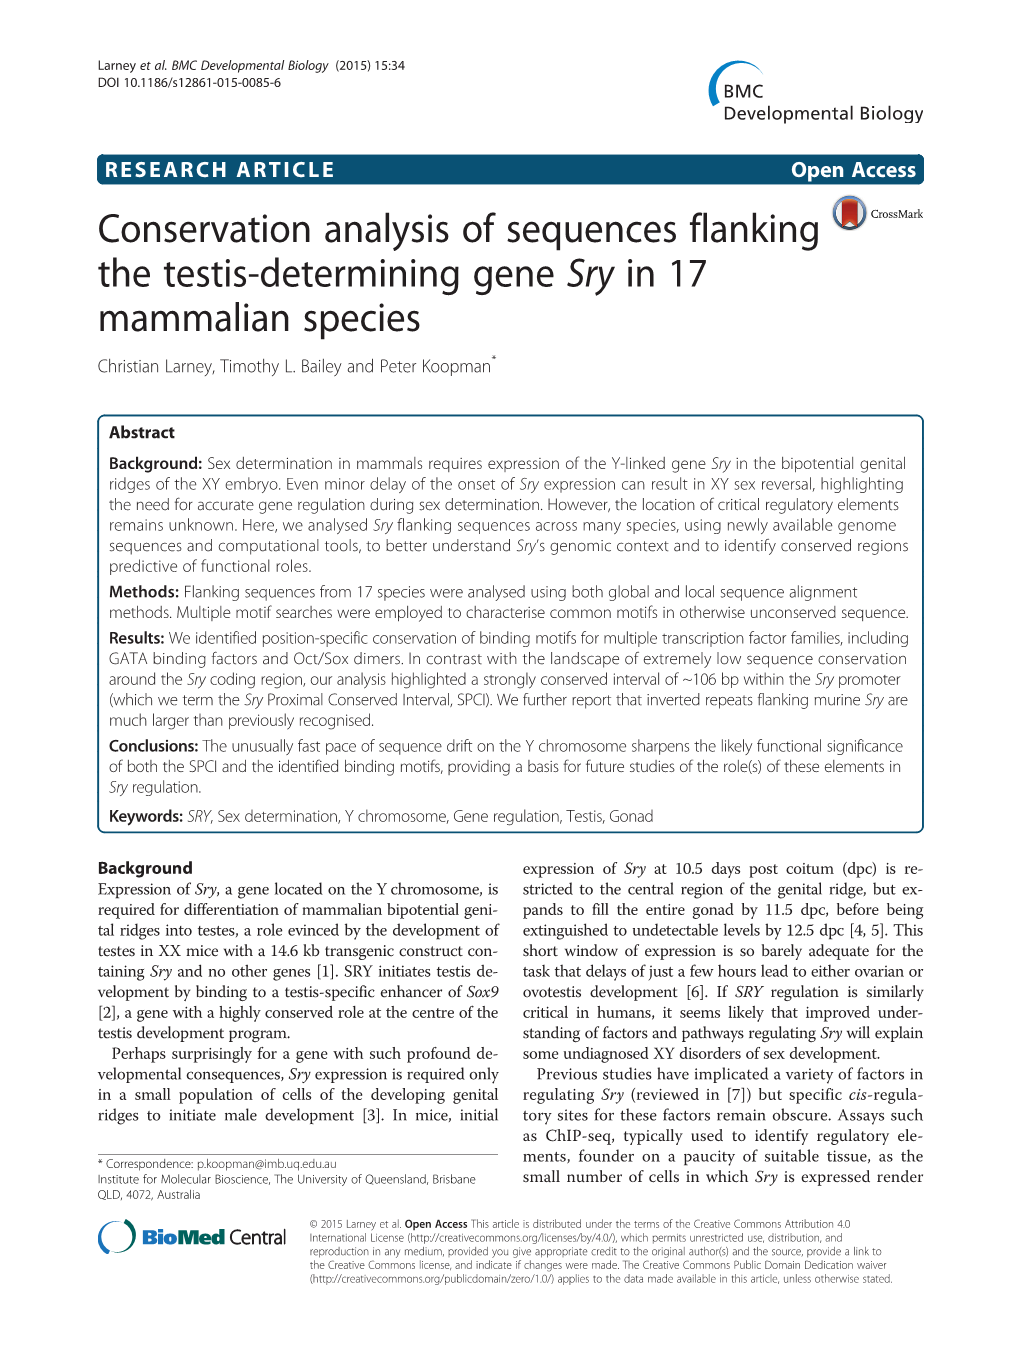 Conservation Analysis of Sequences Flanking the Testis-Determining Gene Sry in 17 Mammalian Species Christian Larney, Timothy L